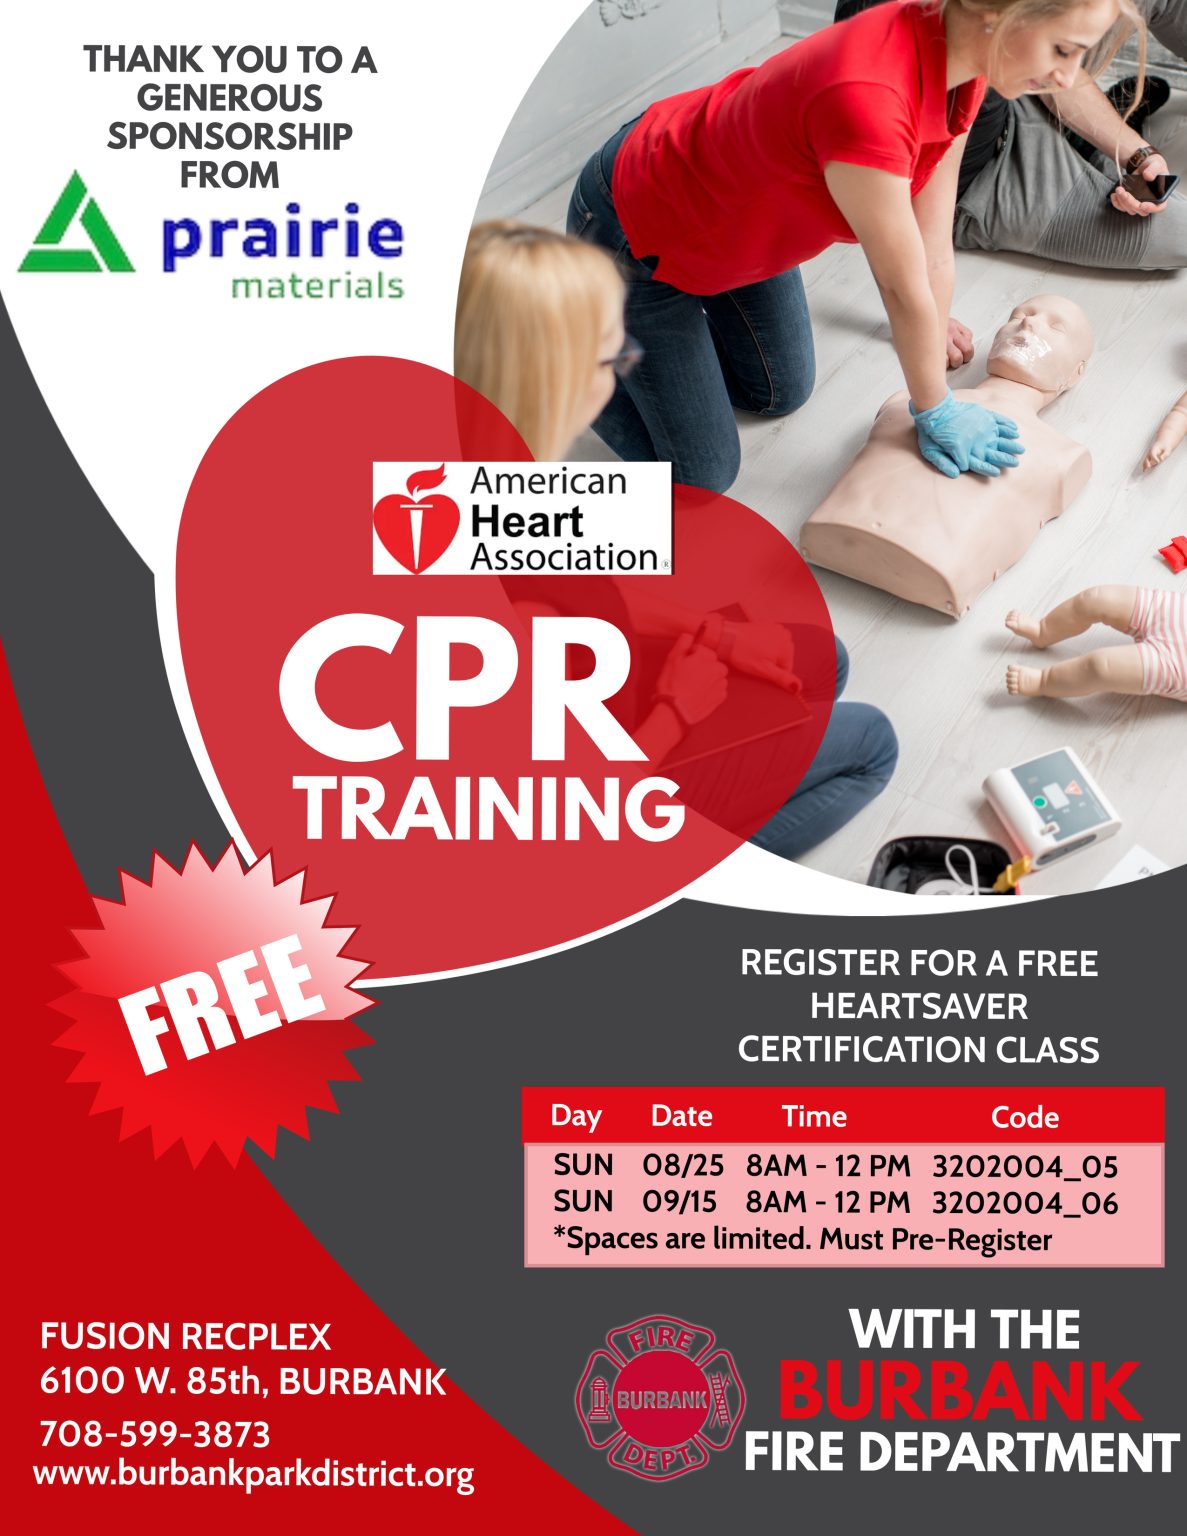 first aid and cpr training advertisement flye (7)